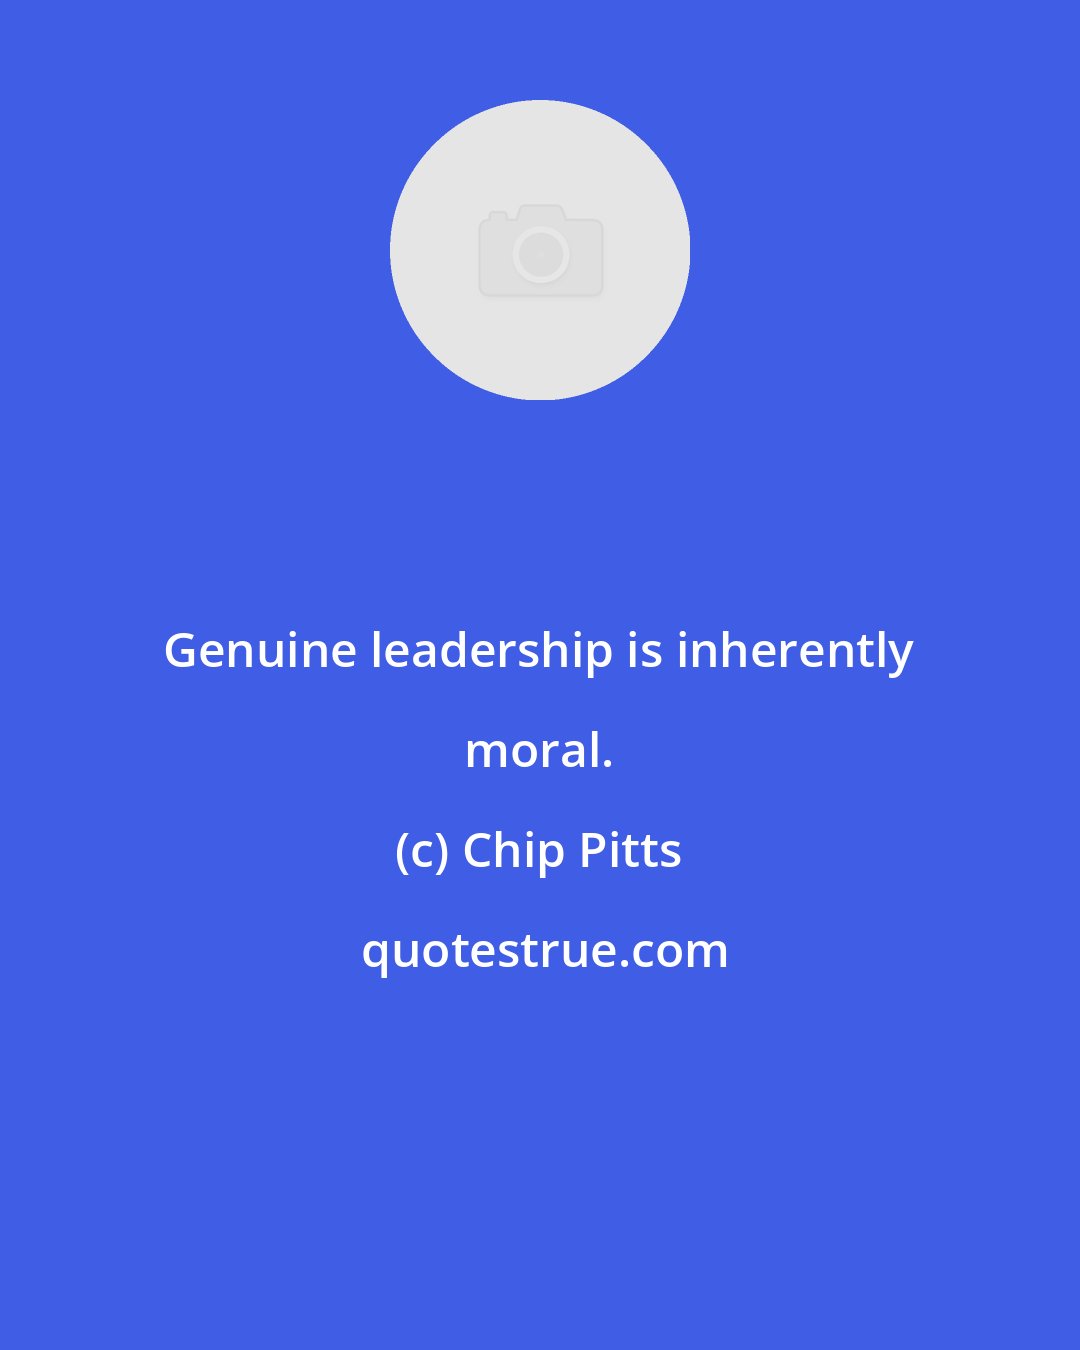 Chip Pitts: Genuine leadership is inherently moral.